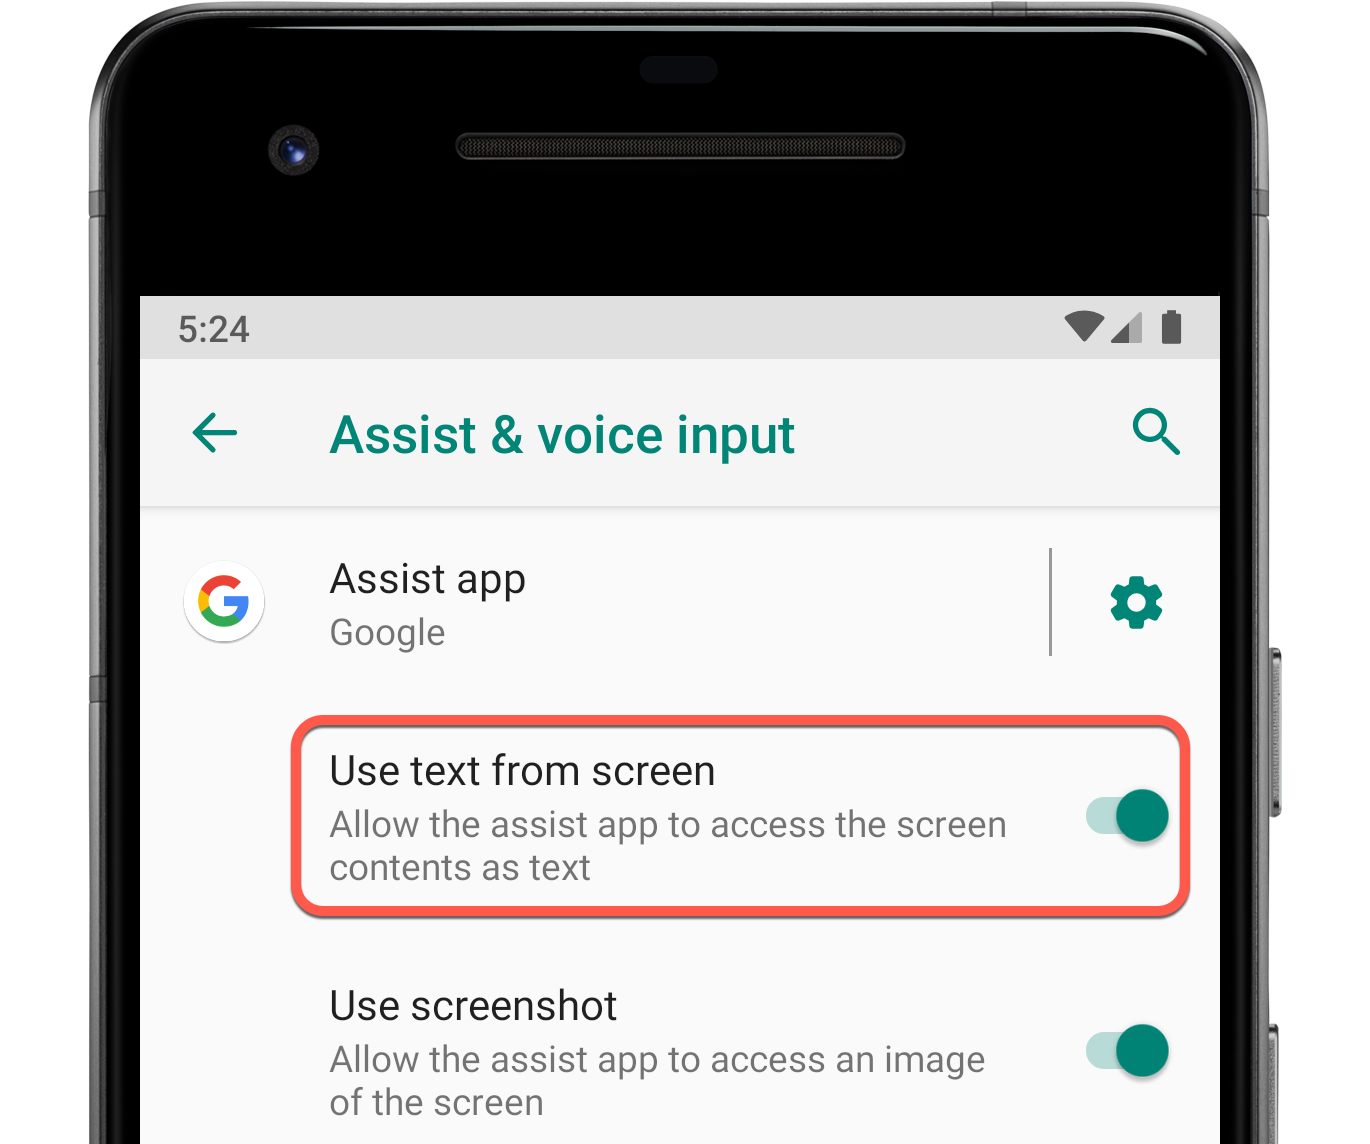 In device settings, users must enable the 'Use text from screen'
            for foreground app invocation to work.